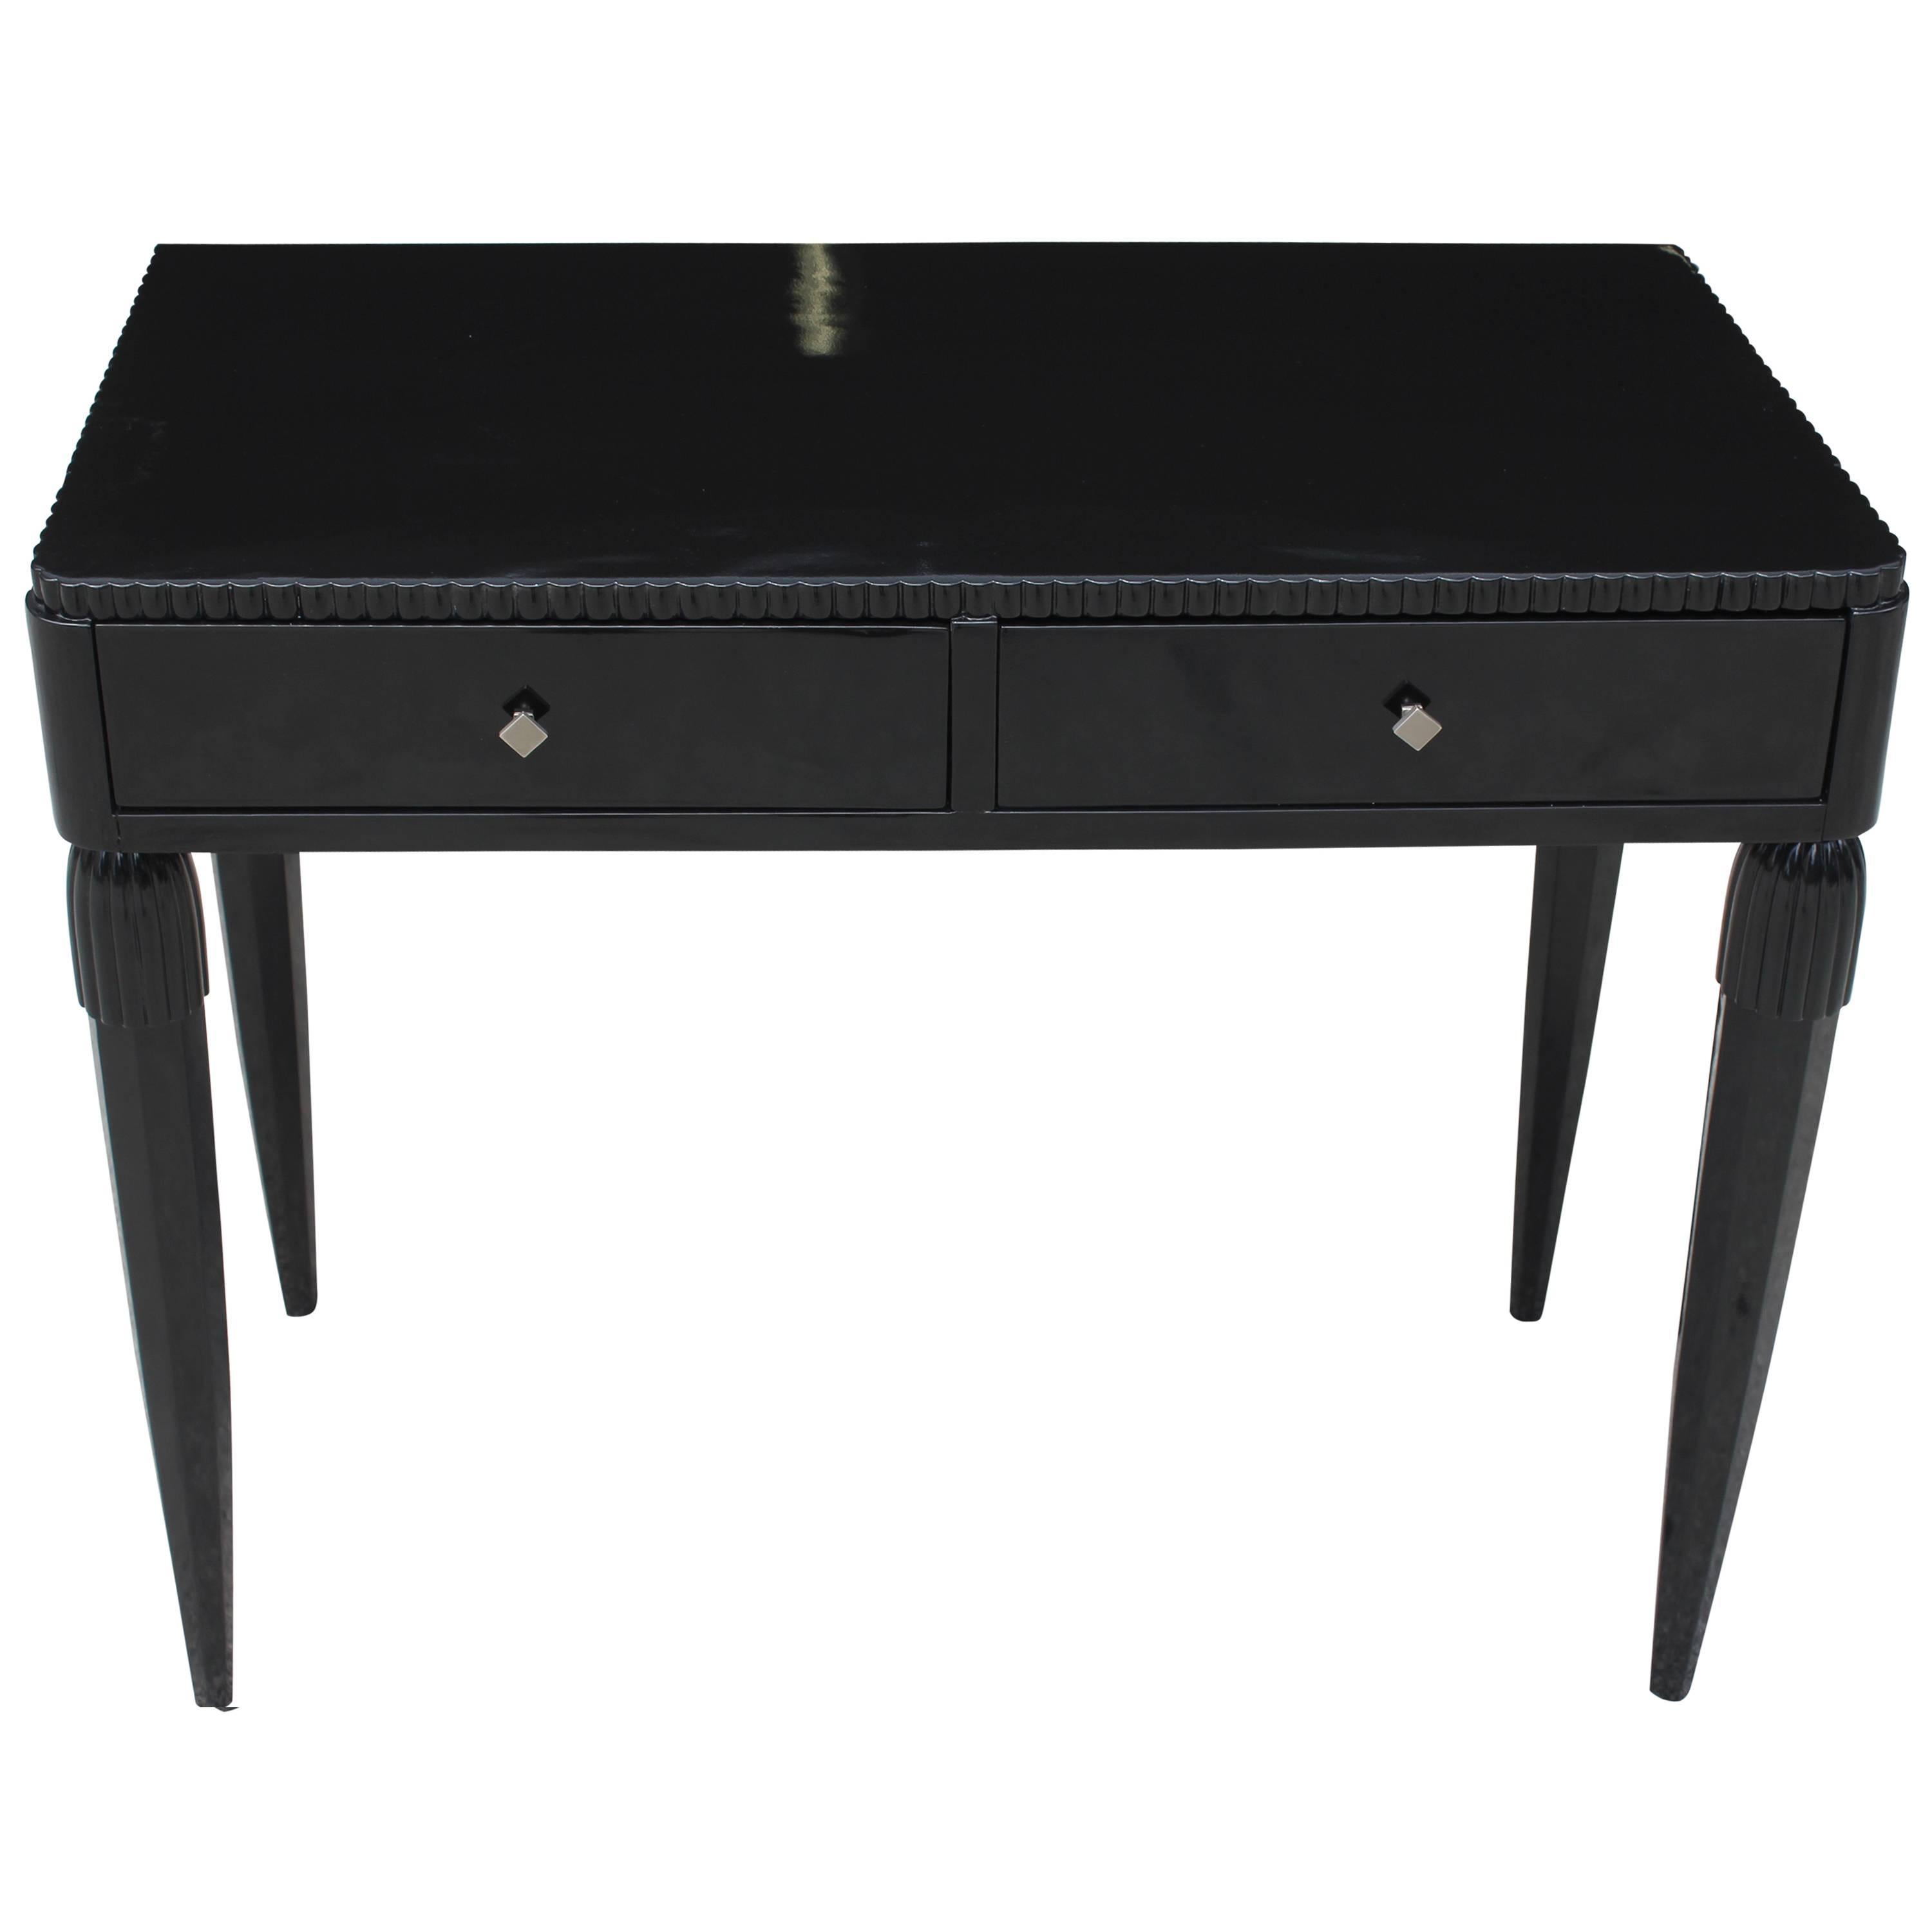 French Art Deco Black Lacquered Console Table with Two Drawers, circa 1940s